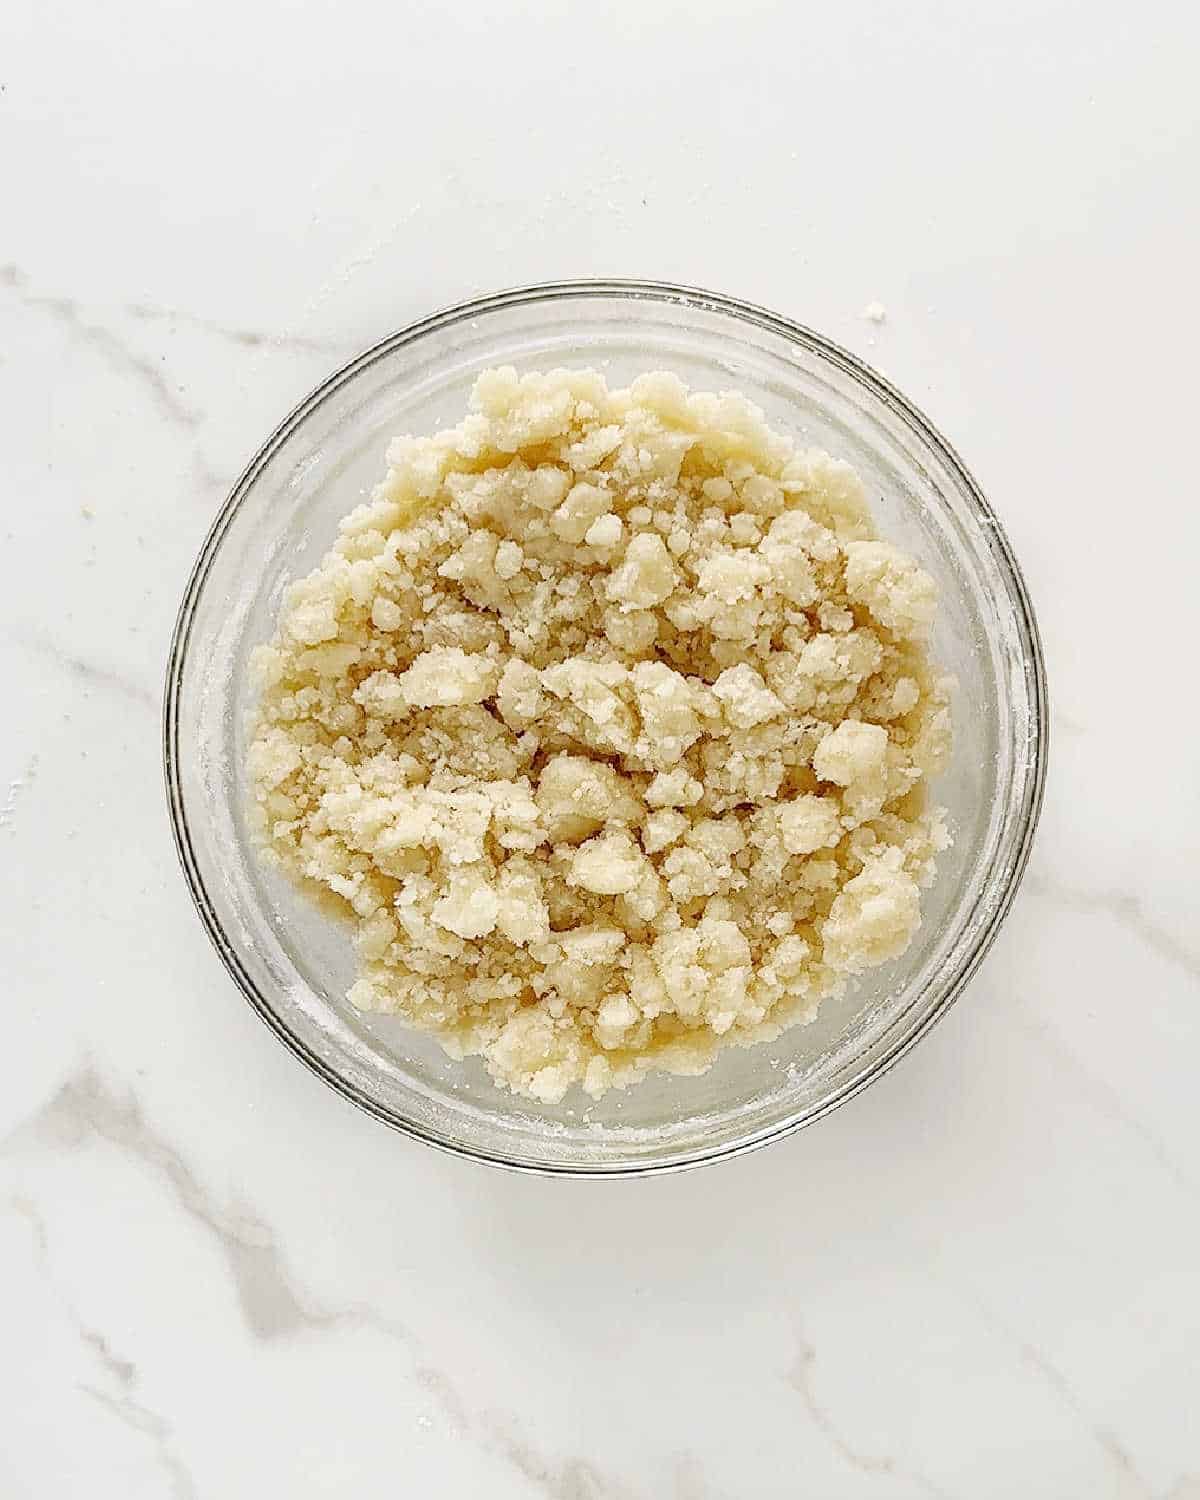 Crumble mixture in a glass bowl on a white marble surface.